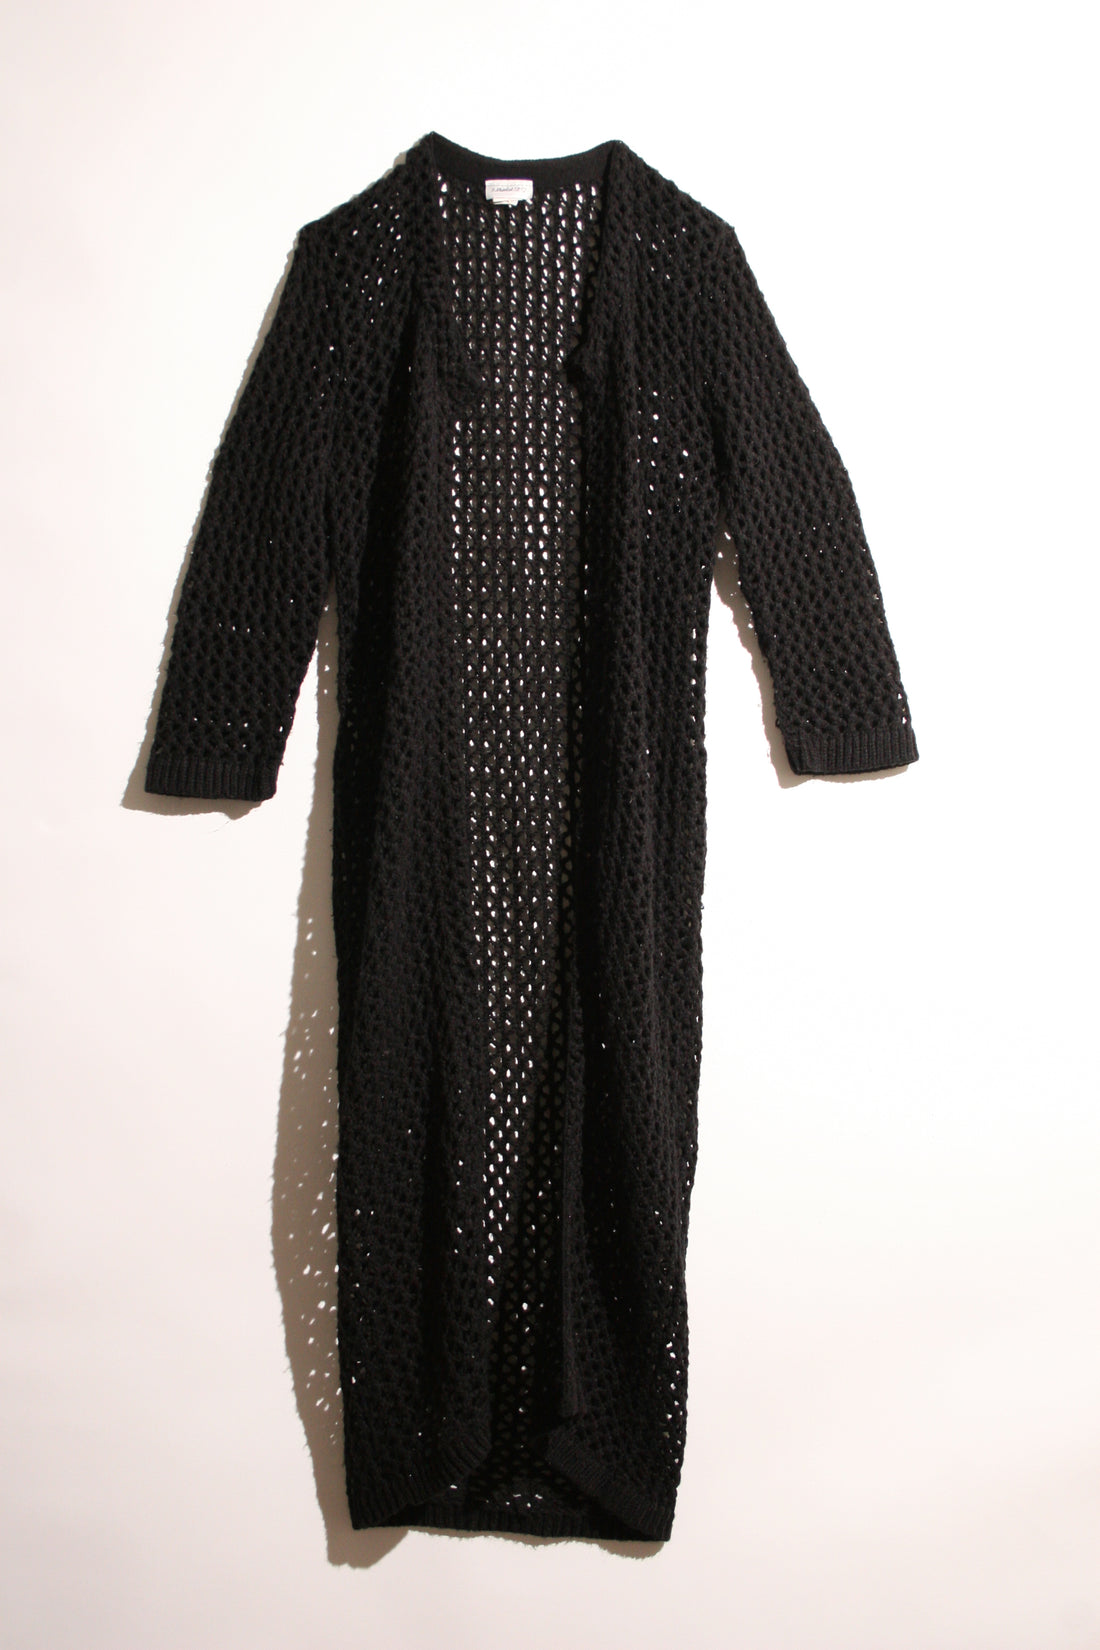 1 Market St - Knitted Long Cardigan Sweater (M)